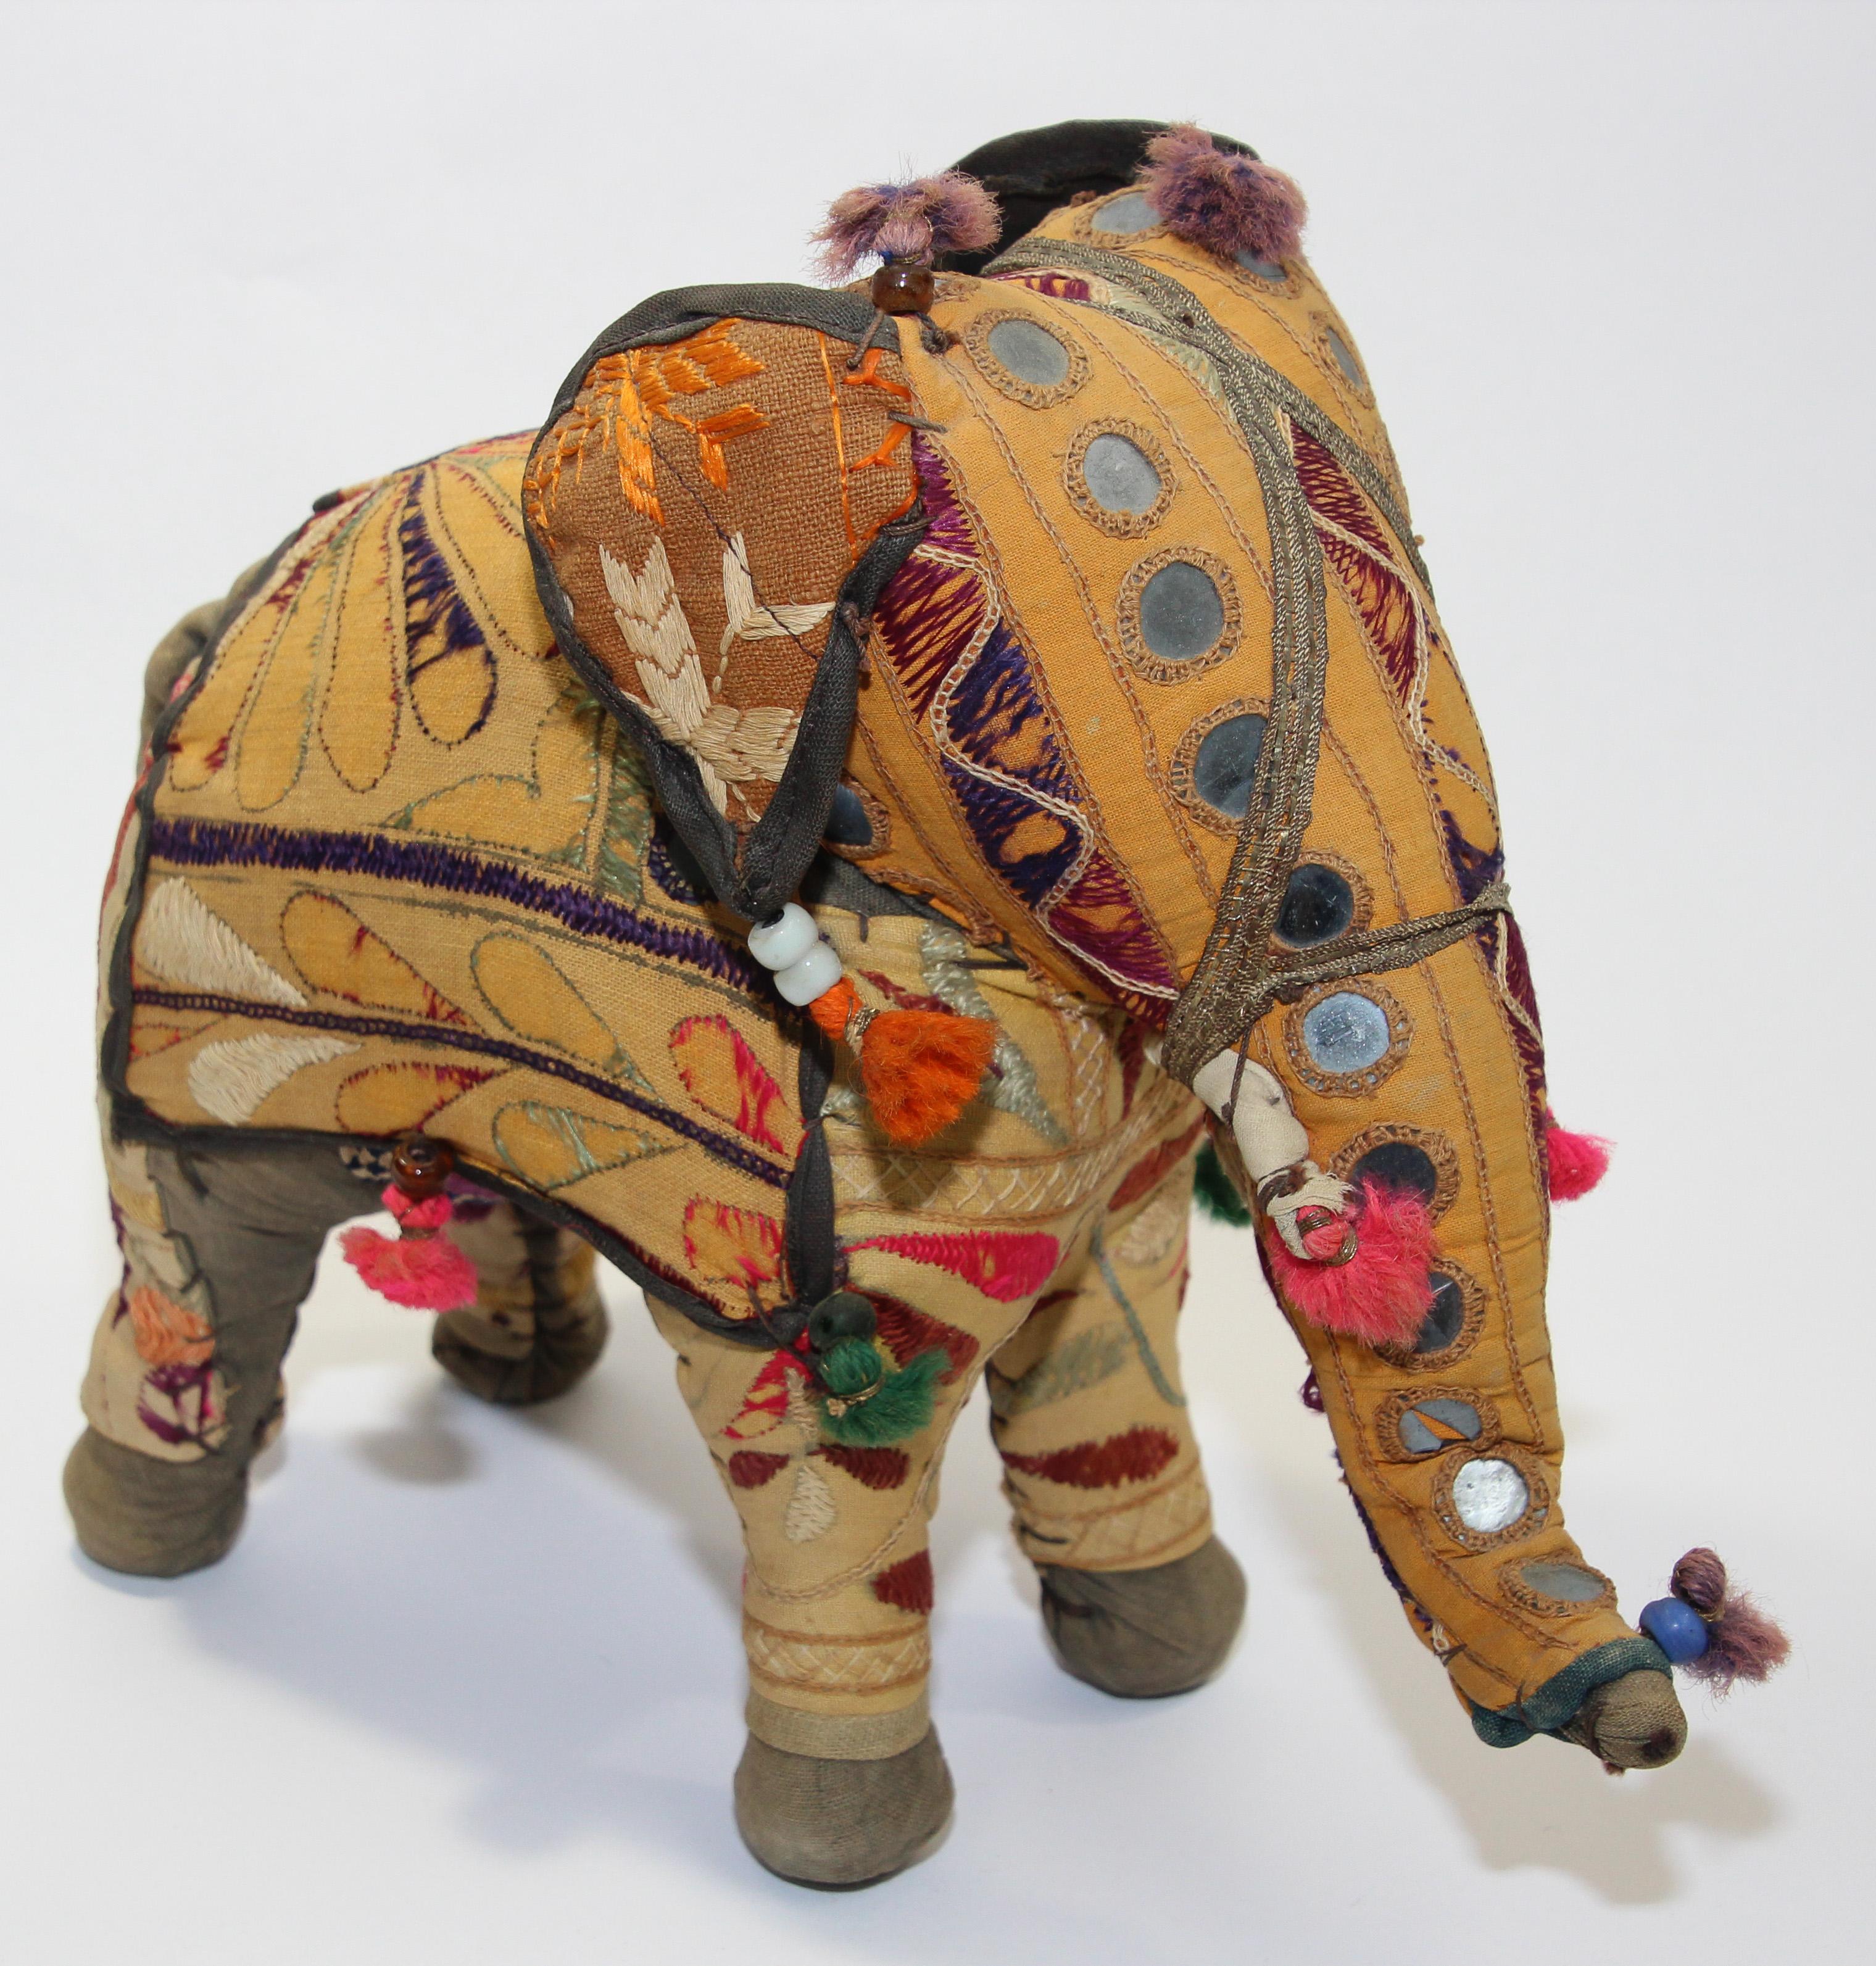 Anglo Raj Vintage Hand-Crafted Stuffed Cotton Embroidered Elephant, India, 1950 For Sale 5